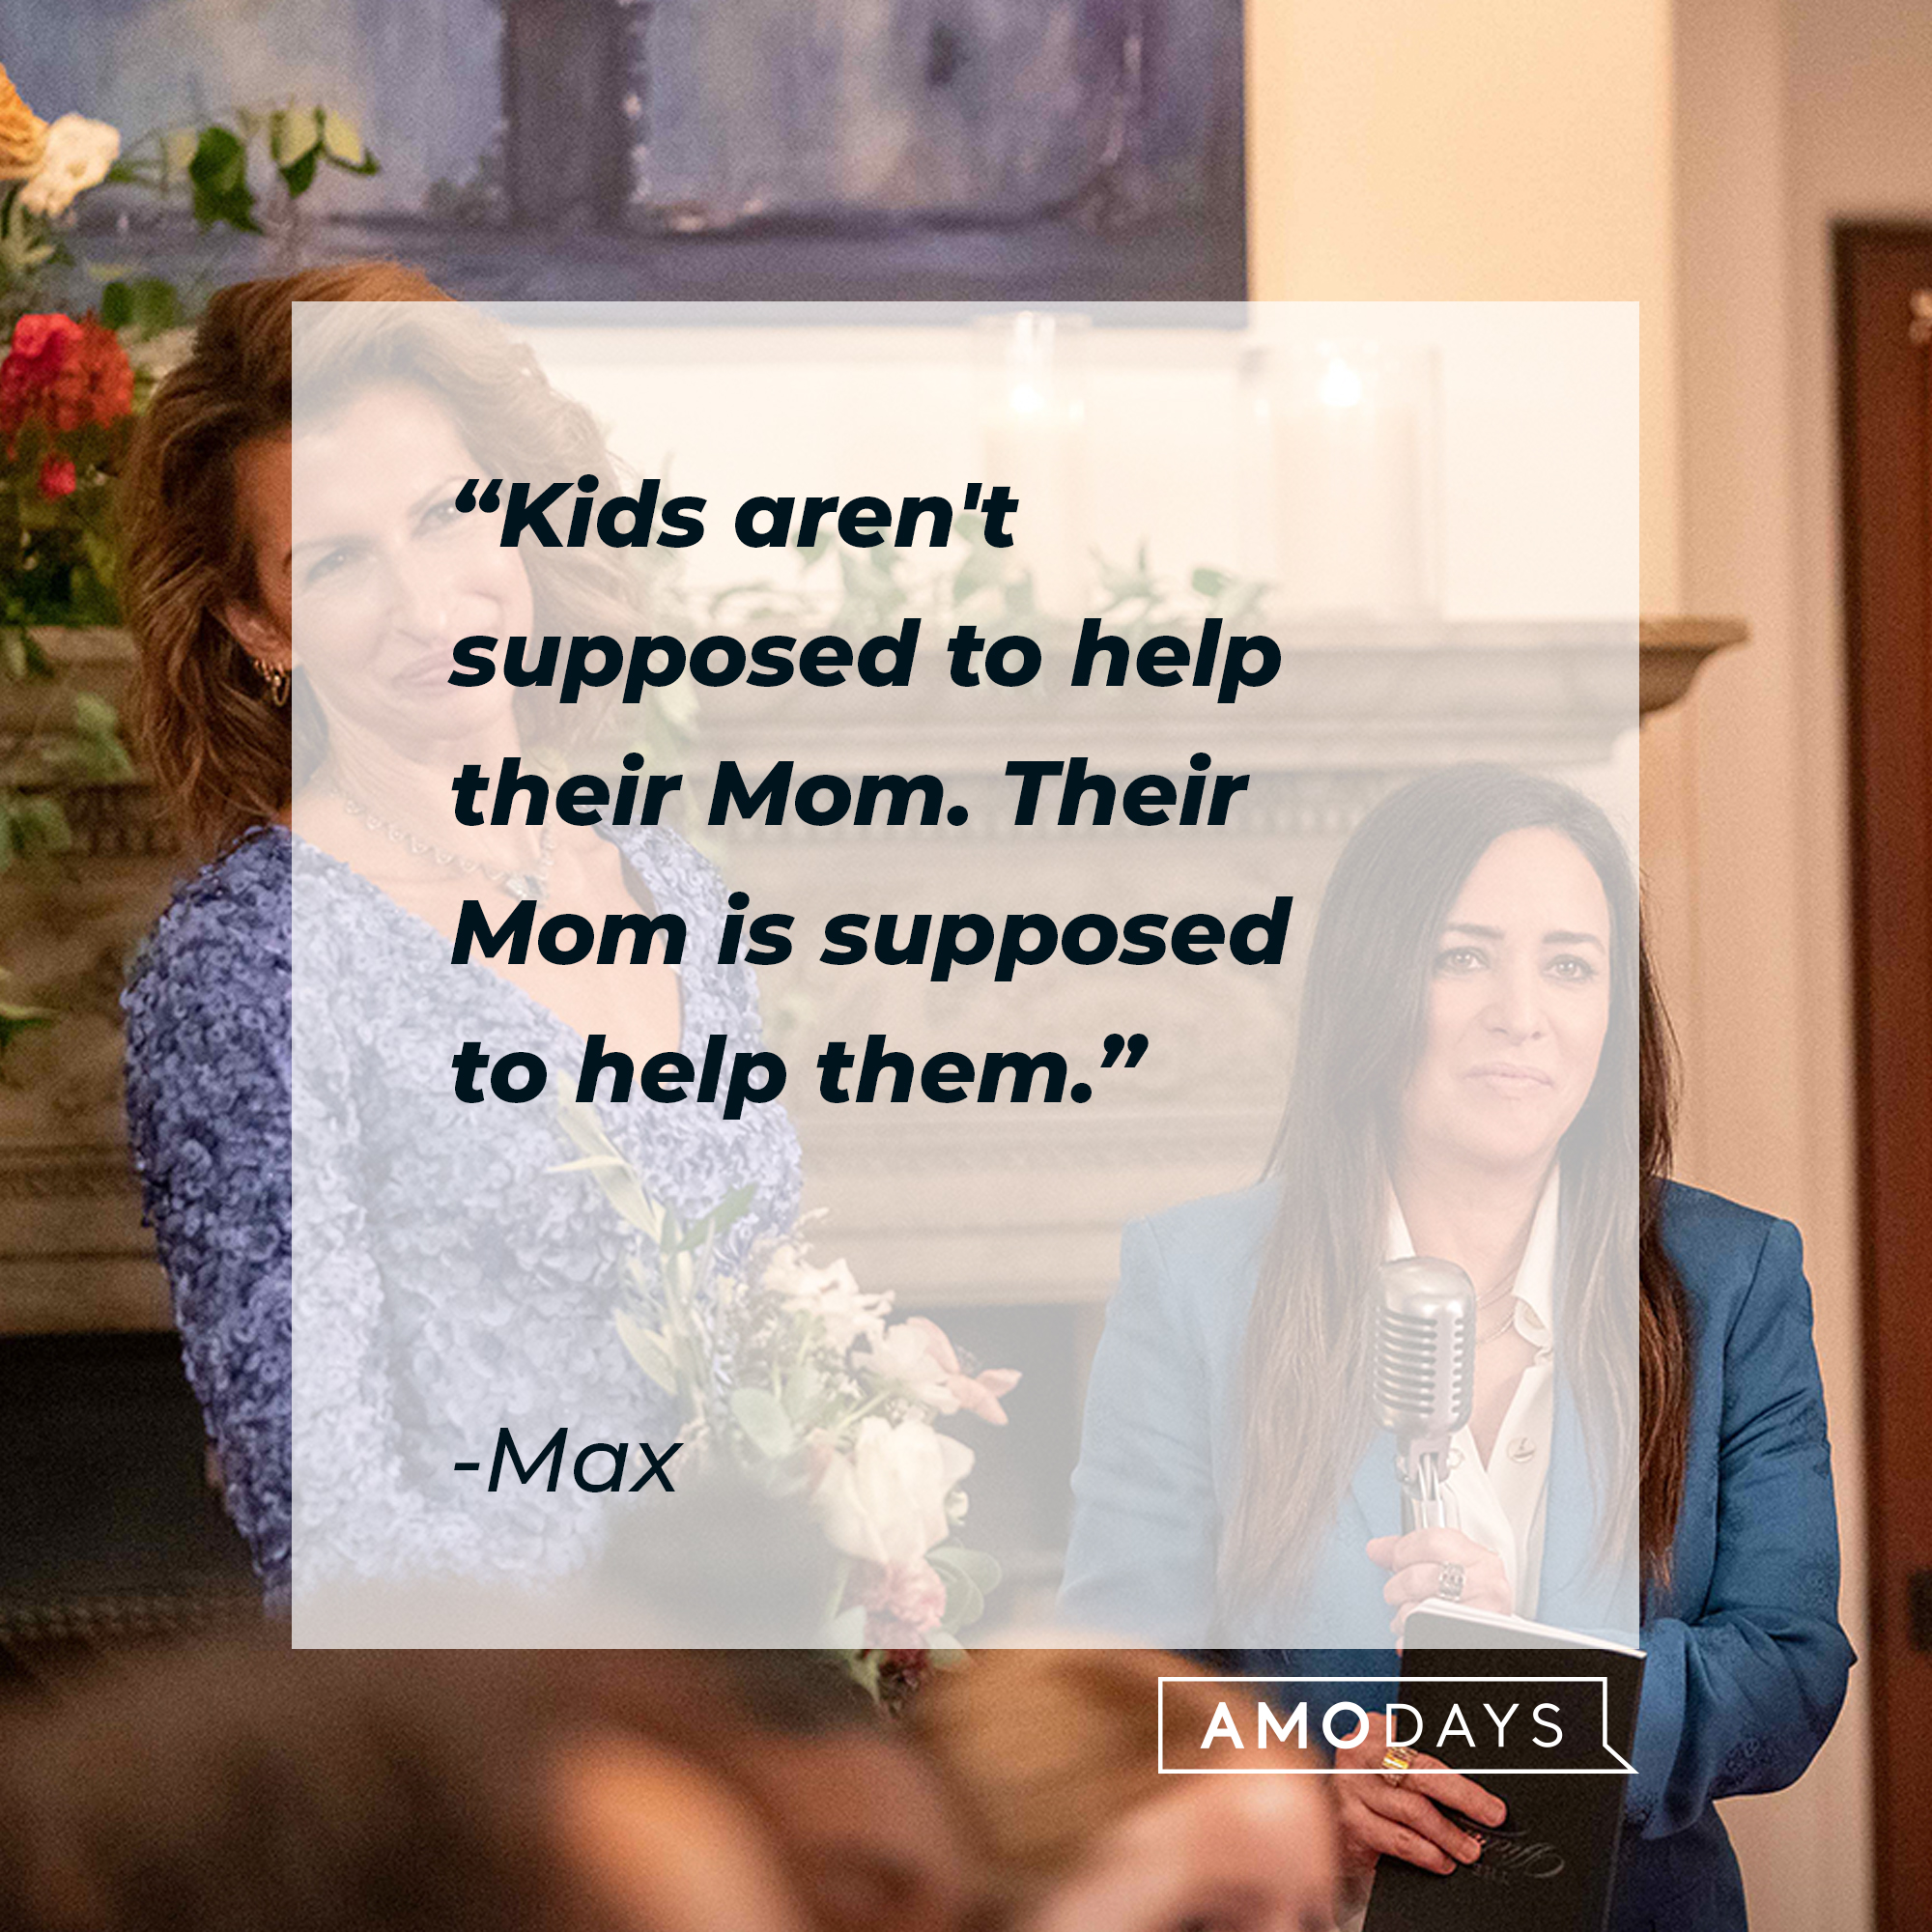 Max's quote: "Kids aren't supposed to help their Mom. Their Mom is supposed to help them." | Source: facebook.com/BetterThingsFX